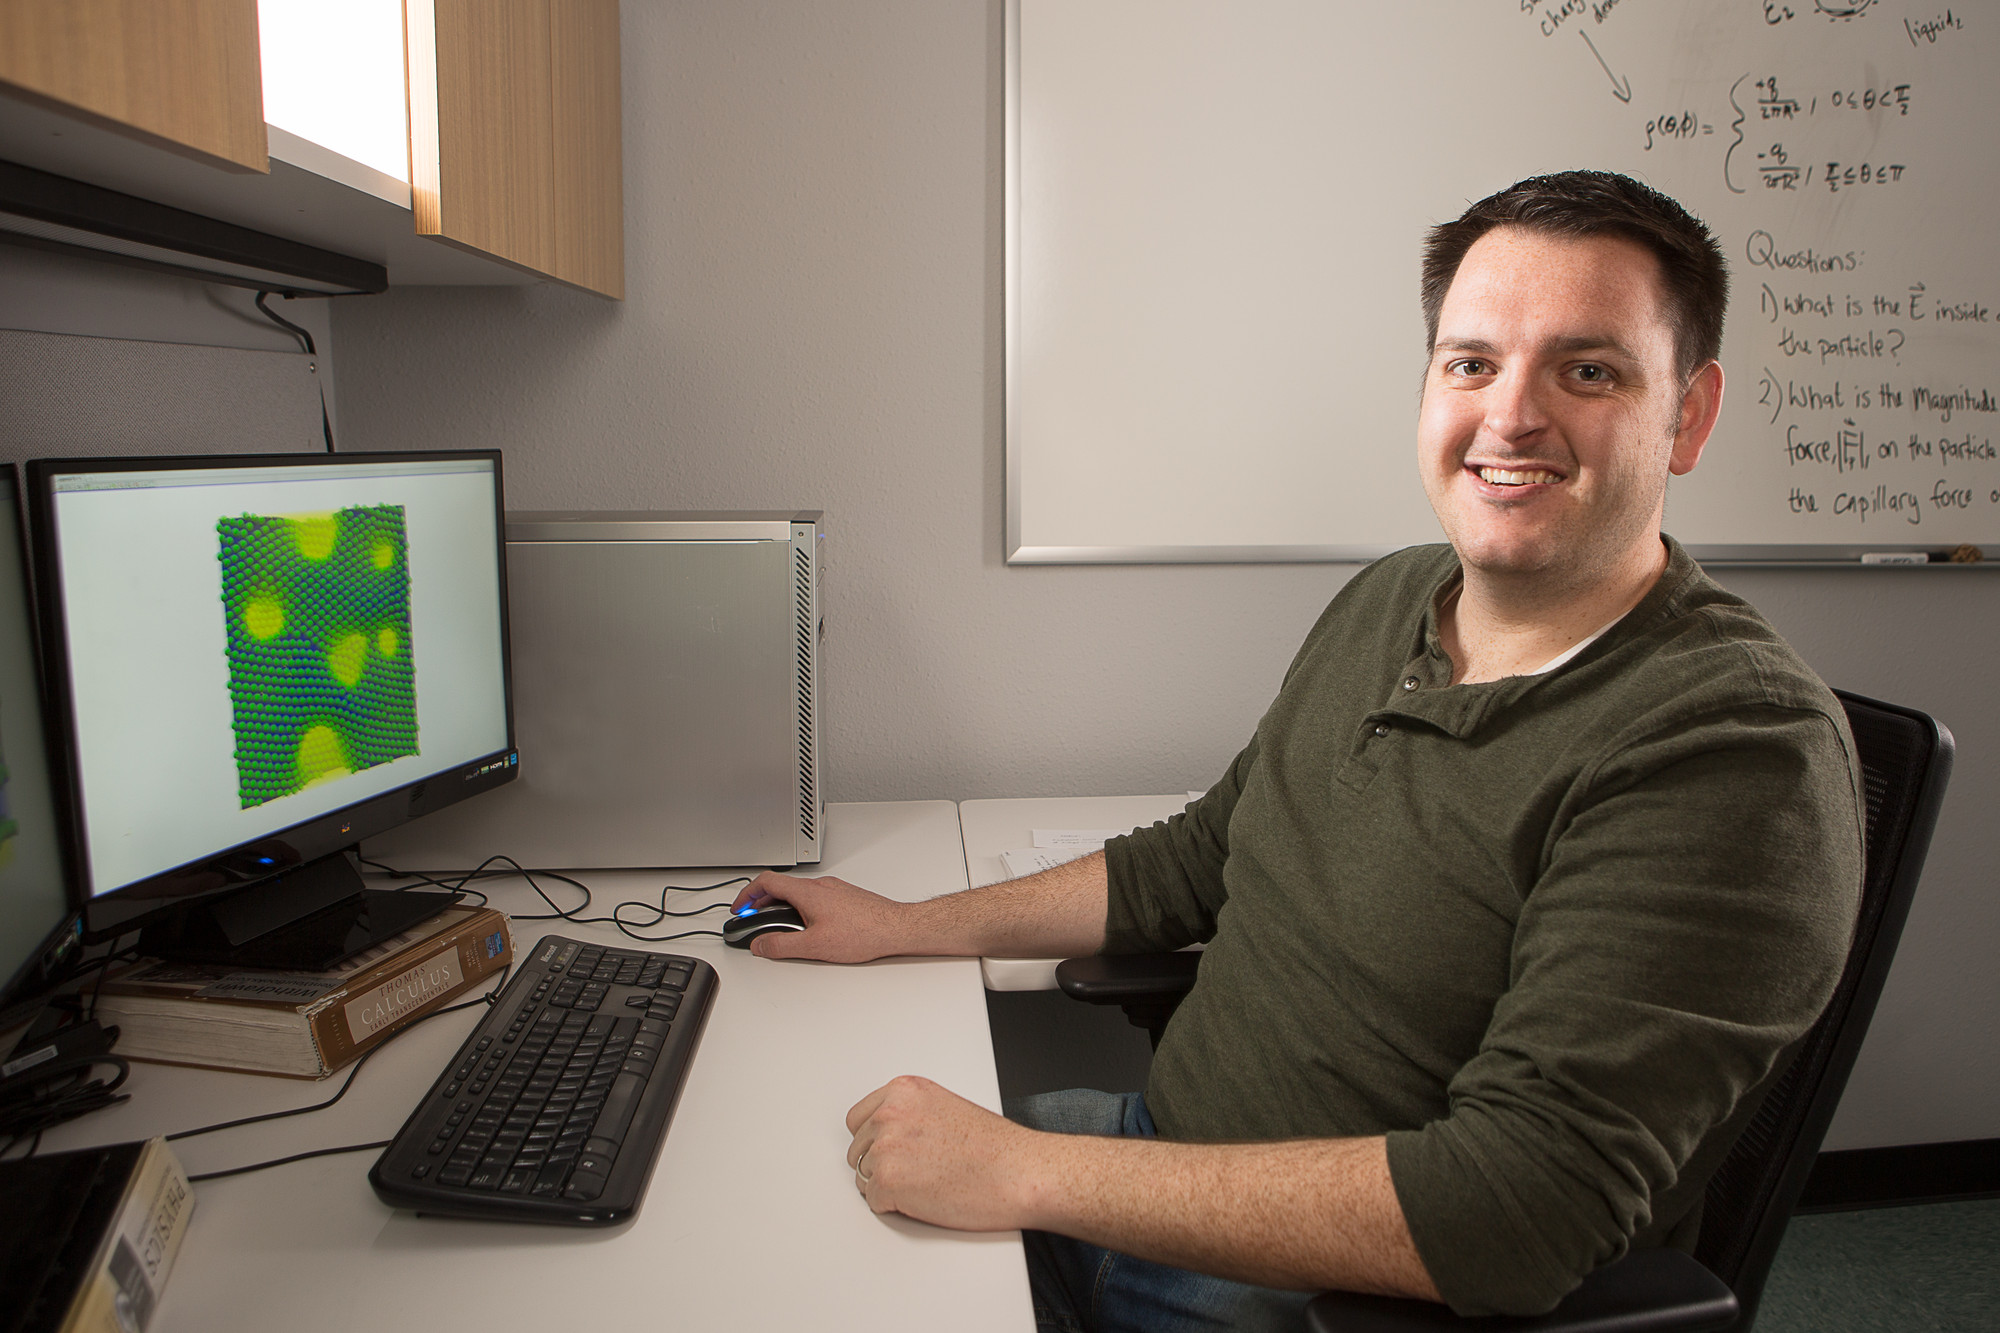 Joseph Carmack studies how to control nano-sized particles and use them to develop more sophisticated materials.